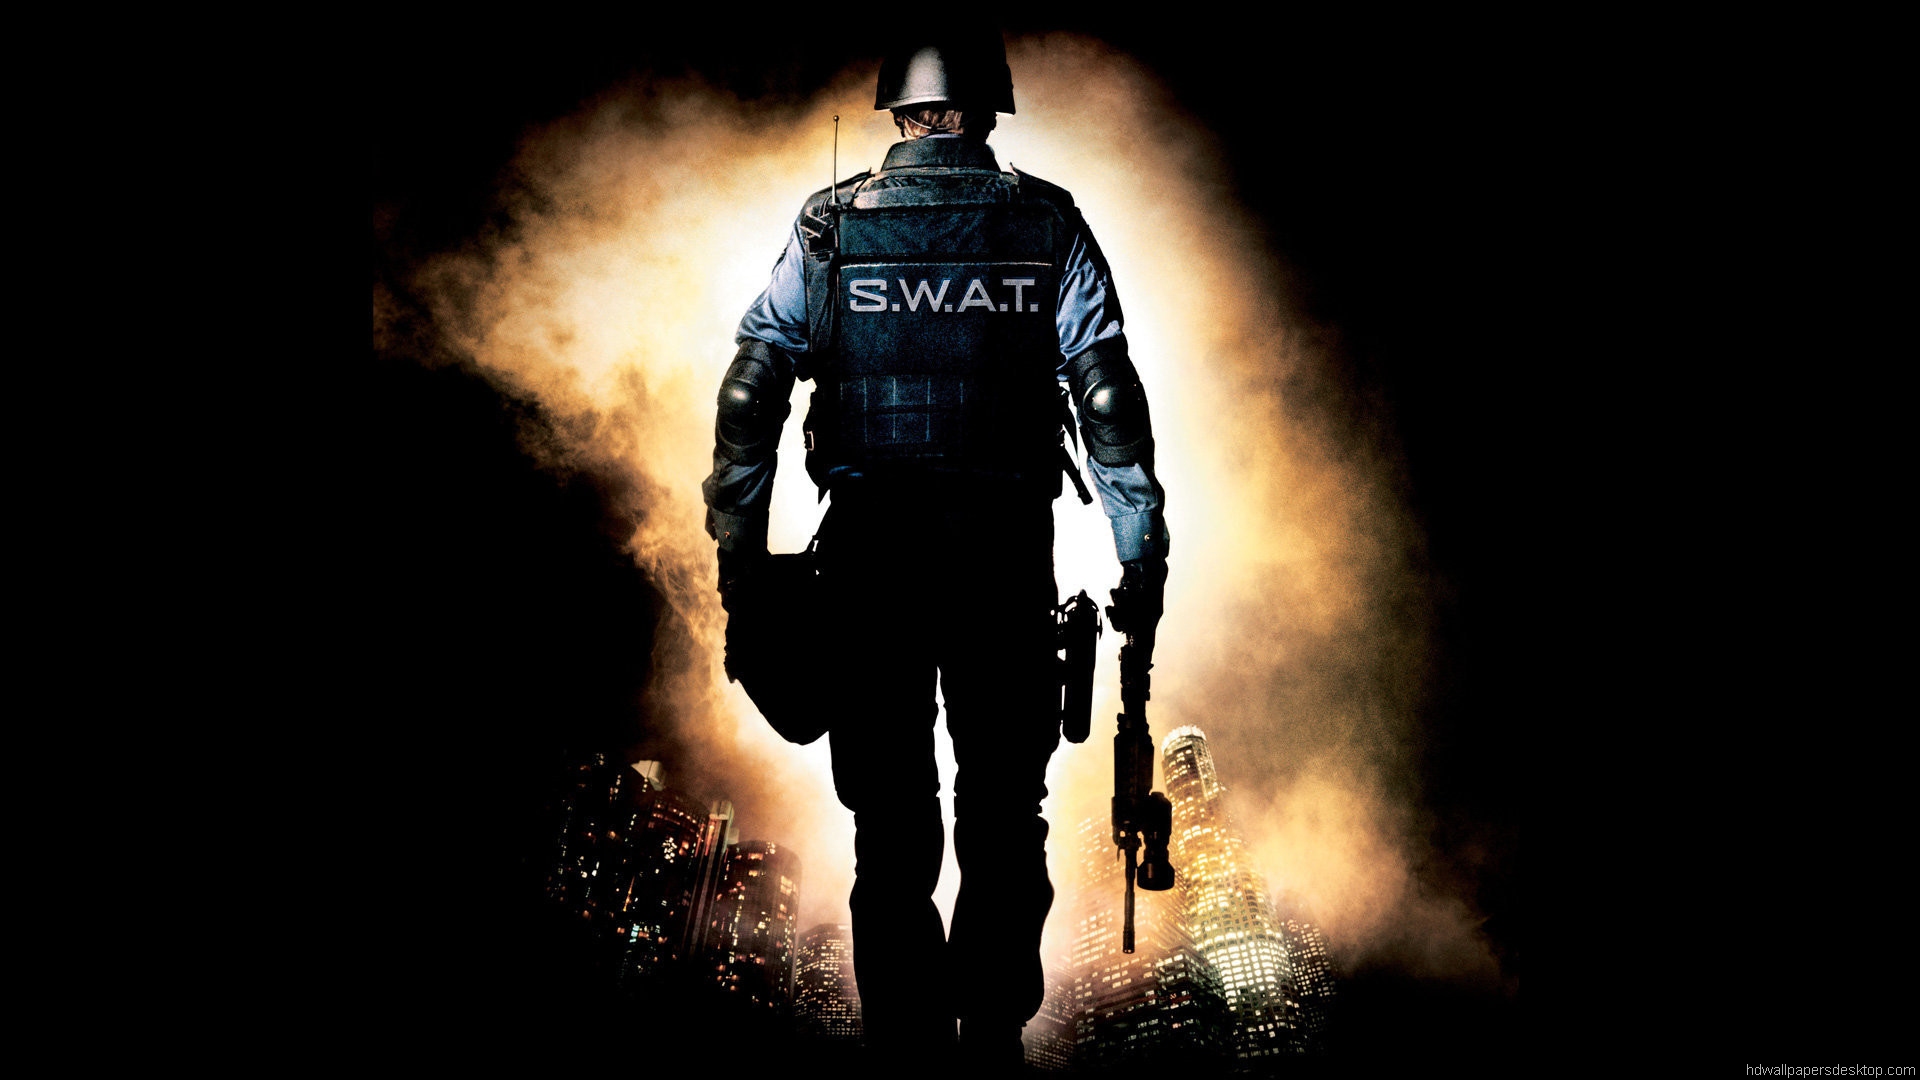 Swat Team Logo Wallpaper Image Amp Pictures Becuo